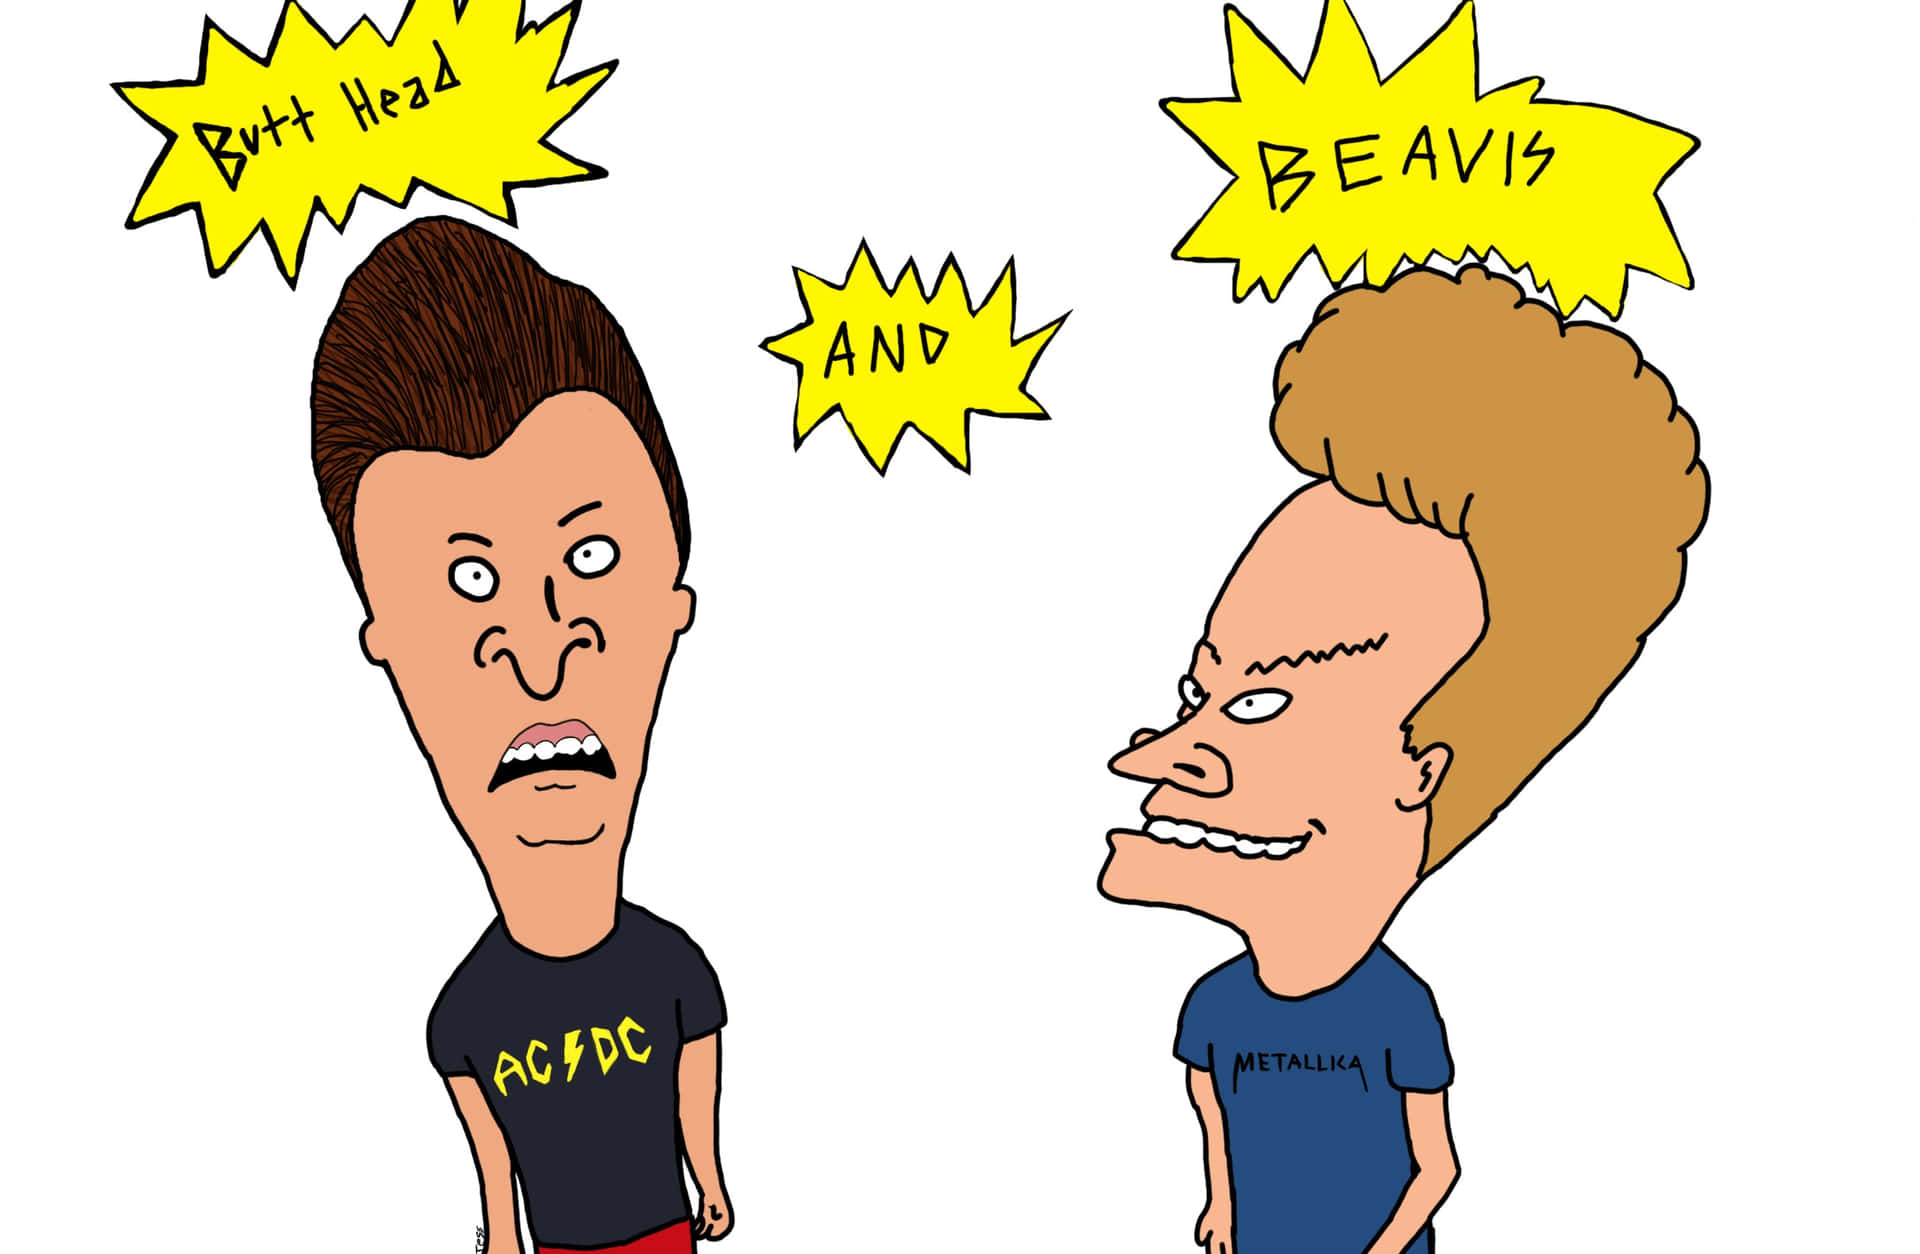 Beavisoch Butthead Tar En Paus I Sin Jakt Efter Bus. (note: This Sentence Is In The Present Tense As That Would Be Most Appropriate For A Computer Or Mobile Wallpaper Description.)